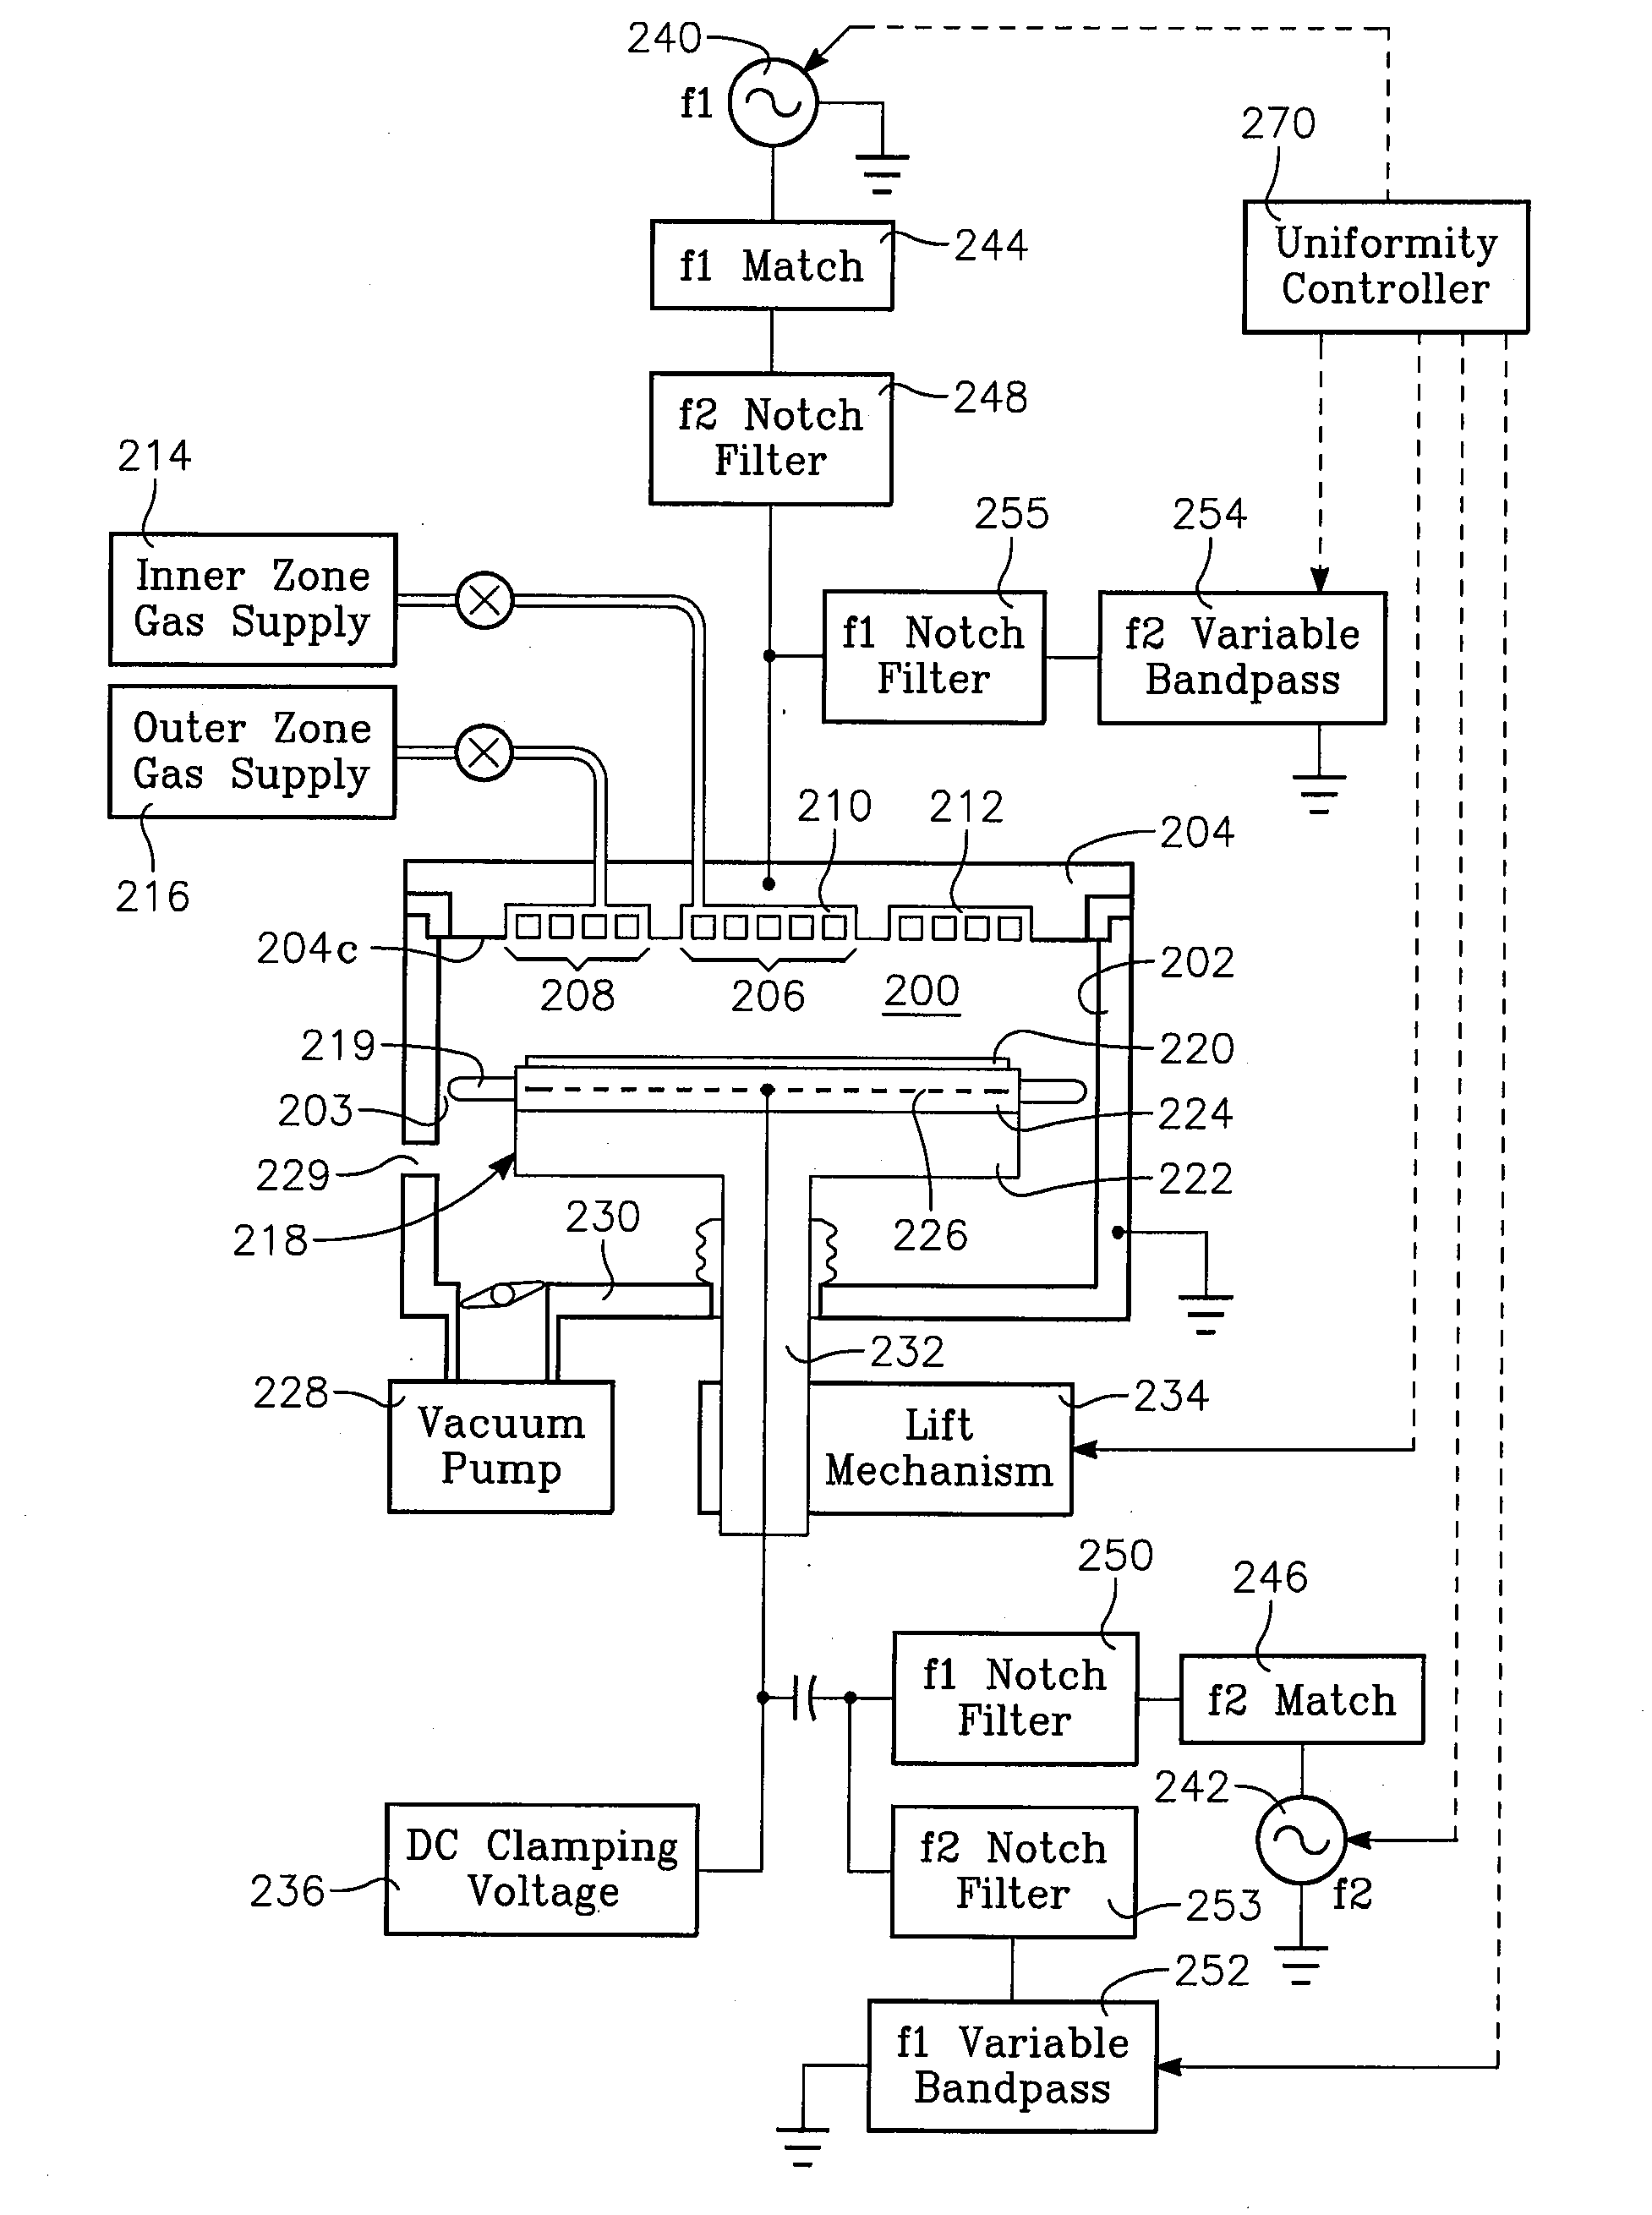 Plasma process uniformity across a wafer by controlling a variable frequency coupled to a harmonic resonator